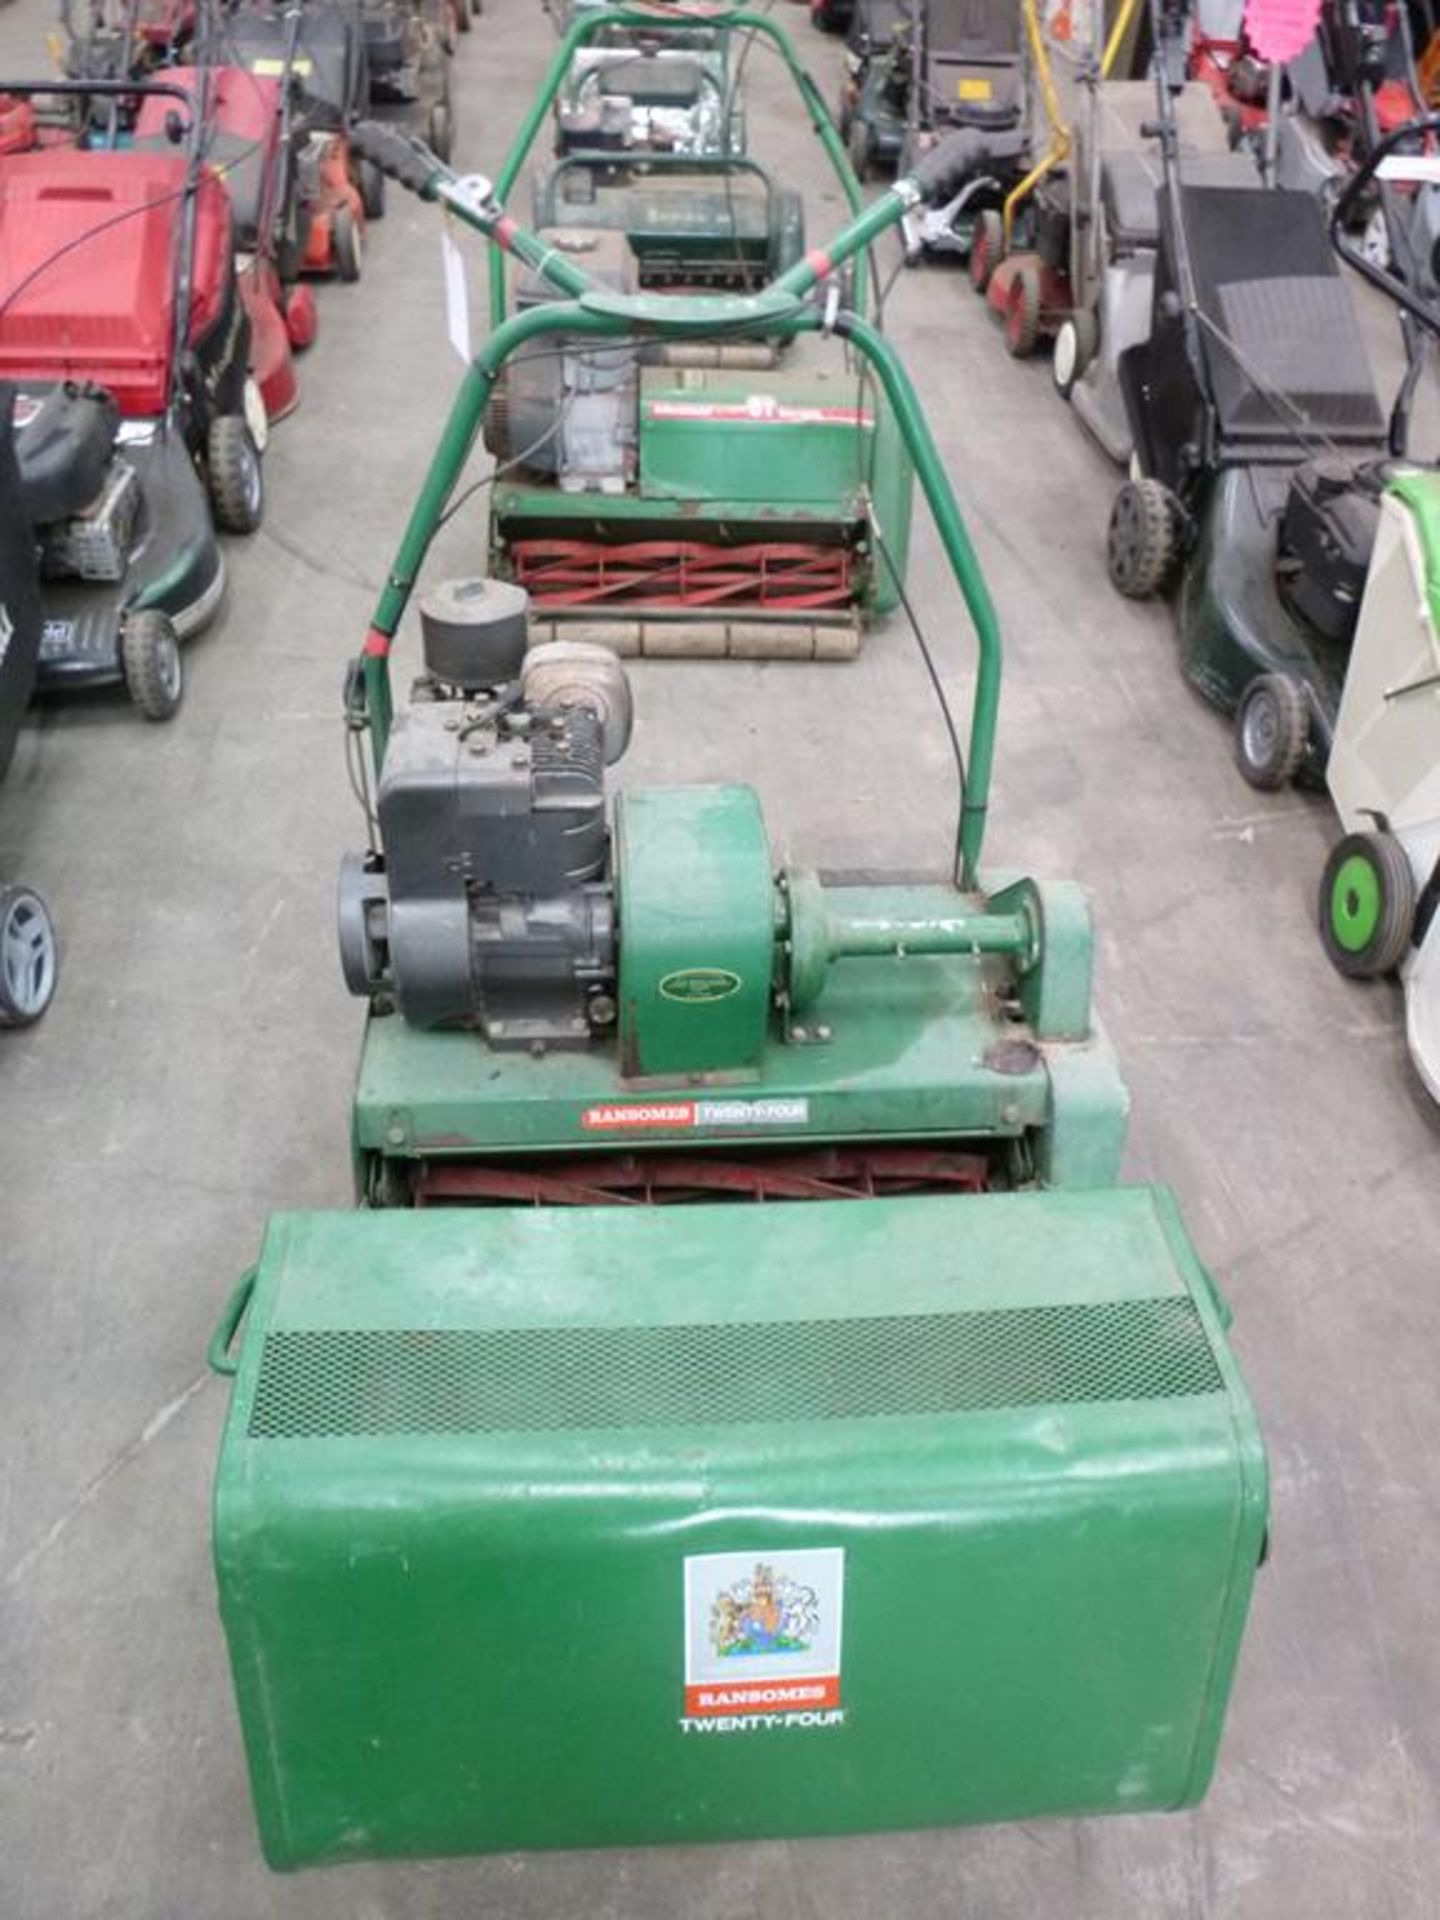 A Trade In Ransomes 'Twenty Four' Reg No 05316 Lawnmower with a Briggs & Stratton 206cc Engine - Image 4 of 4